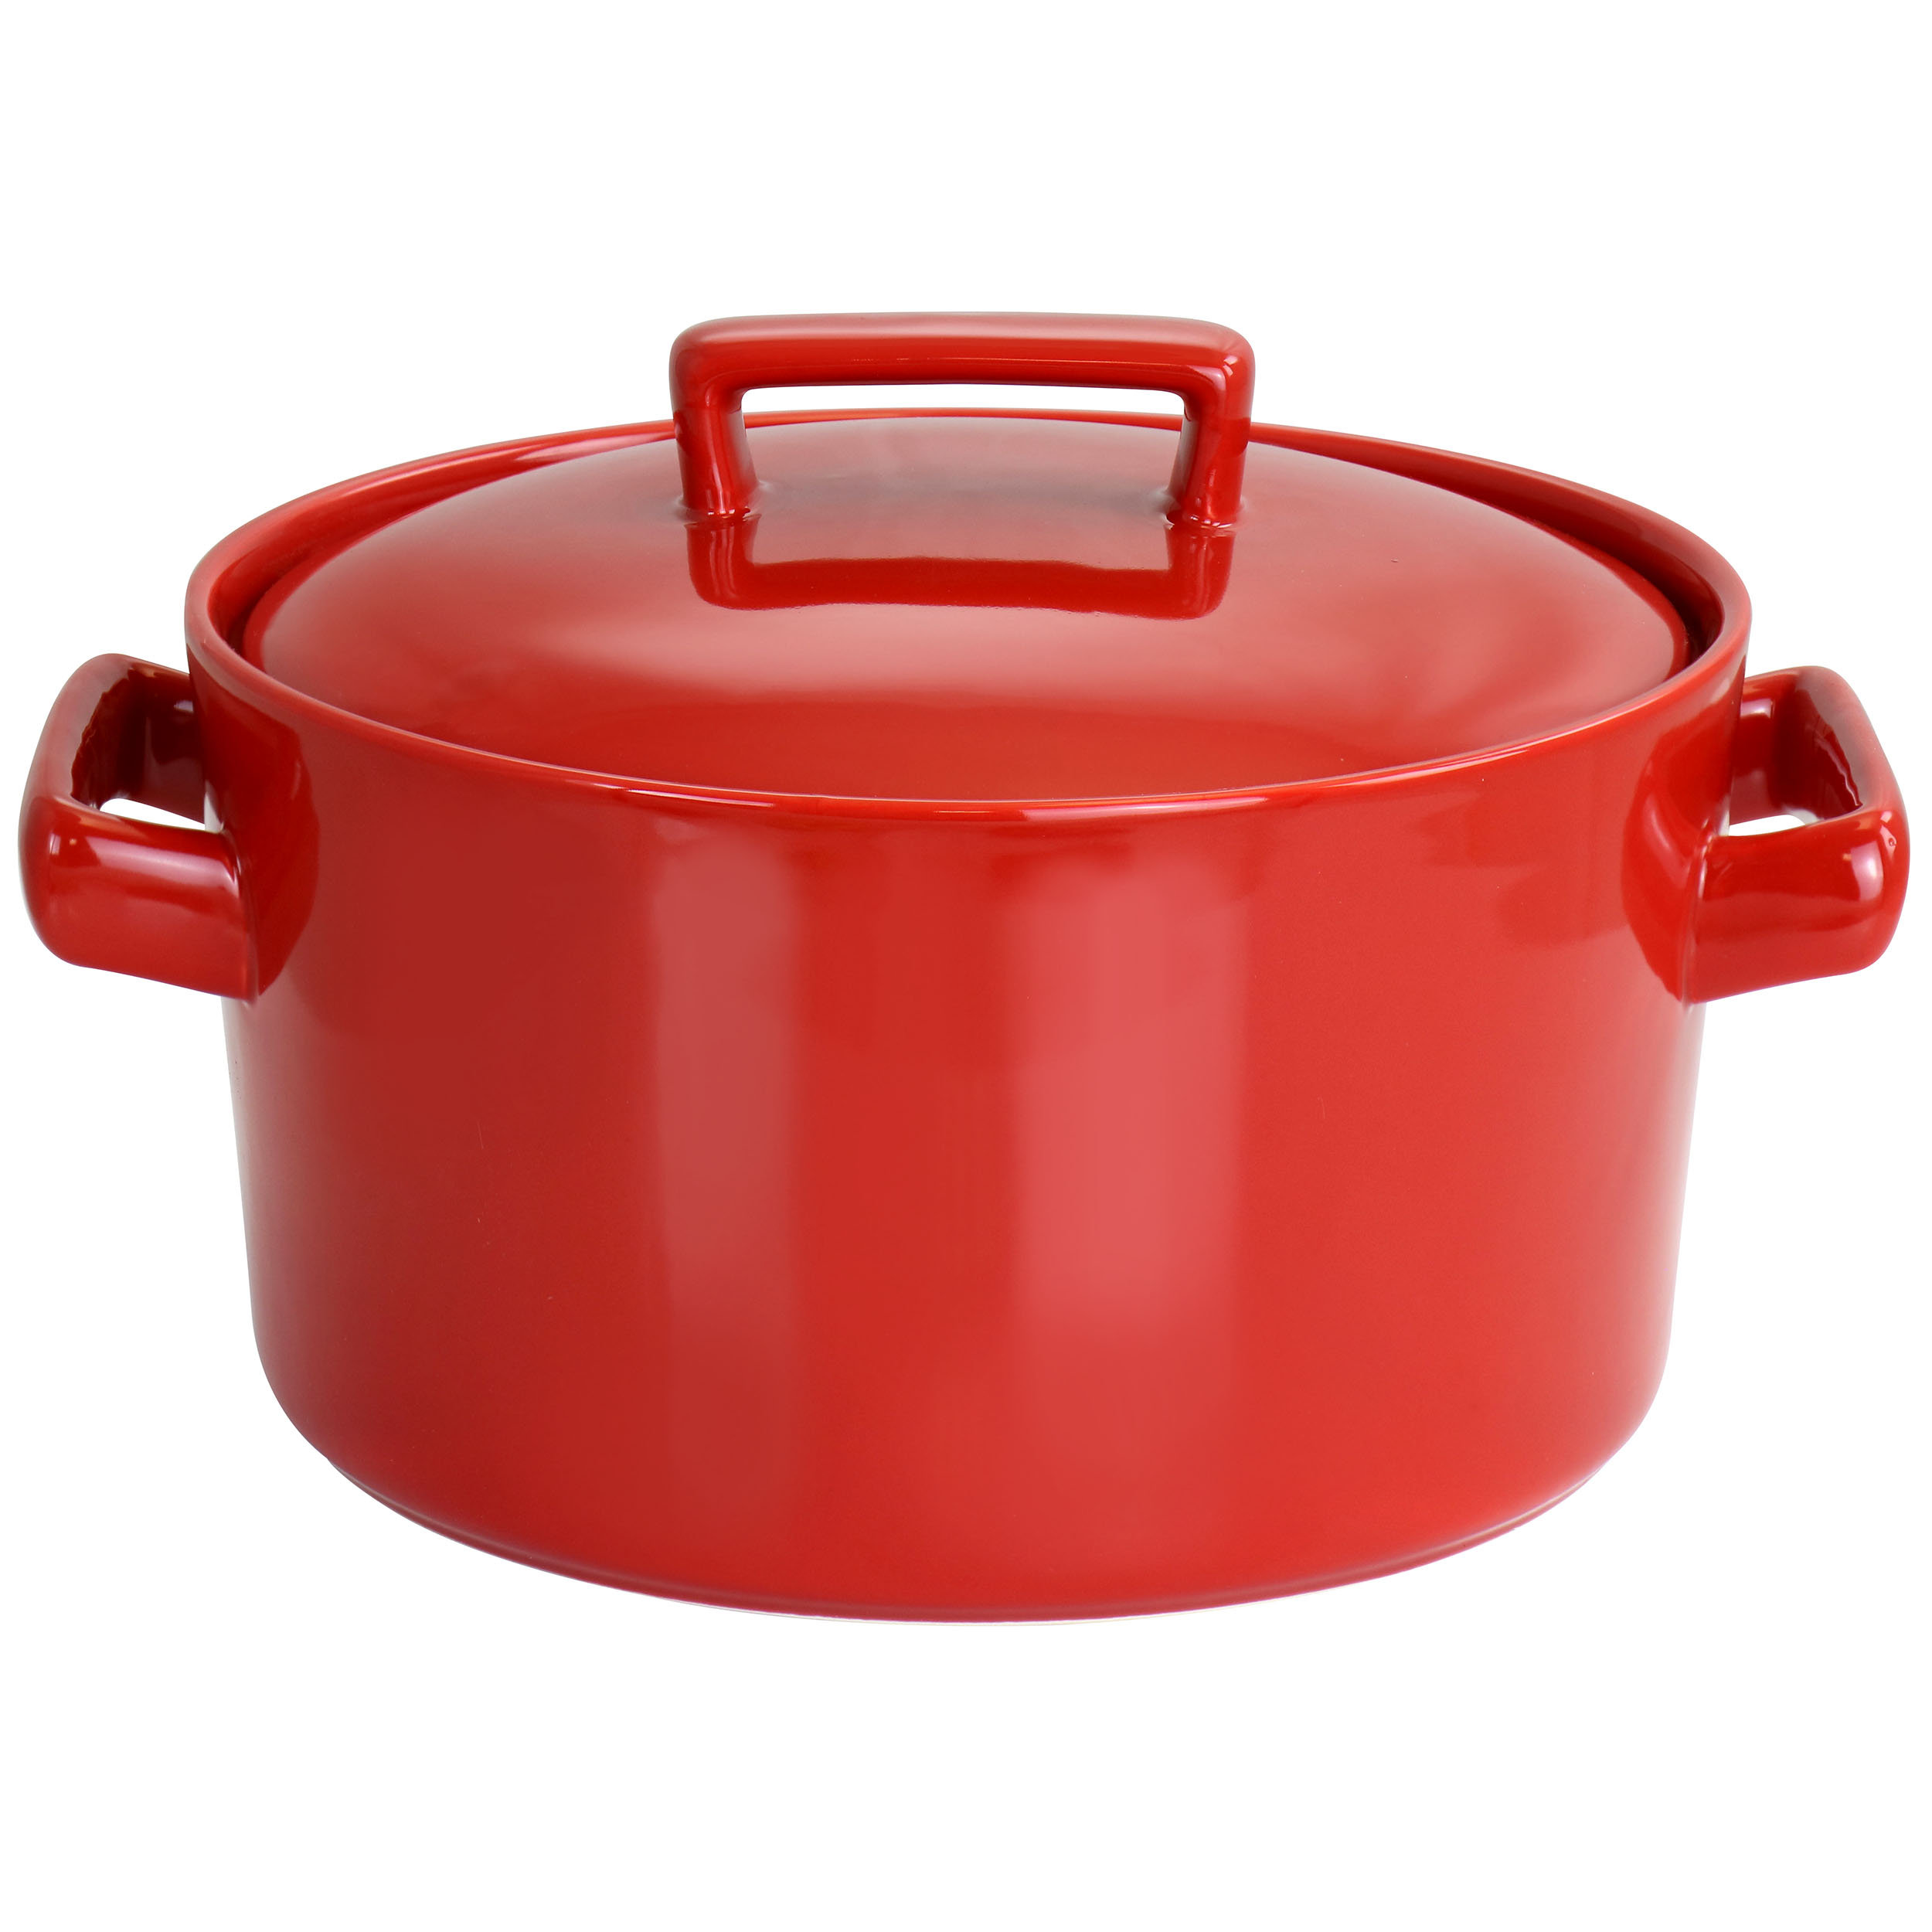 Martha Stewart Colored Enameled Cast Iron Round Casserole, 6 qt for $49.99